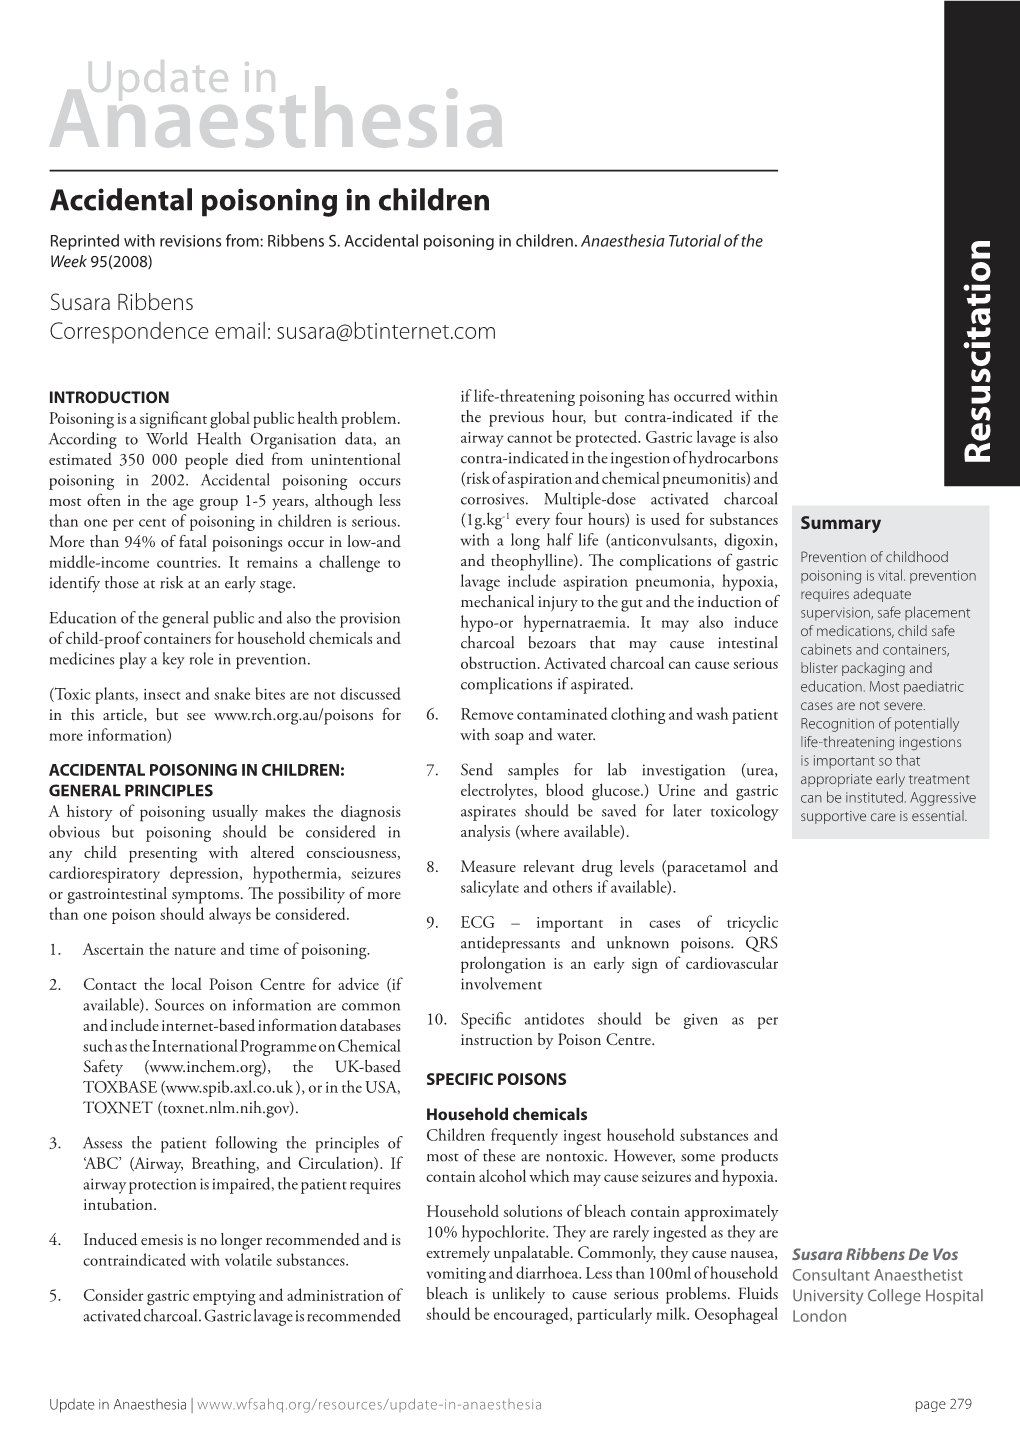 Accidental Poisoning in Children Reprinted with Revisions From: Ribbens S